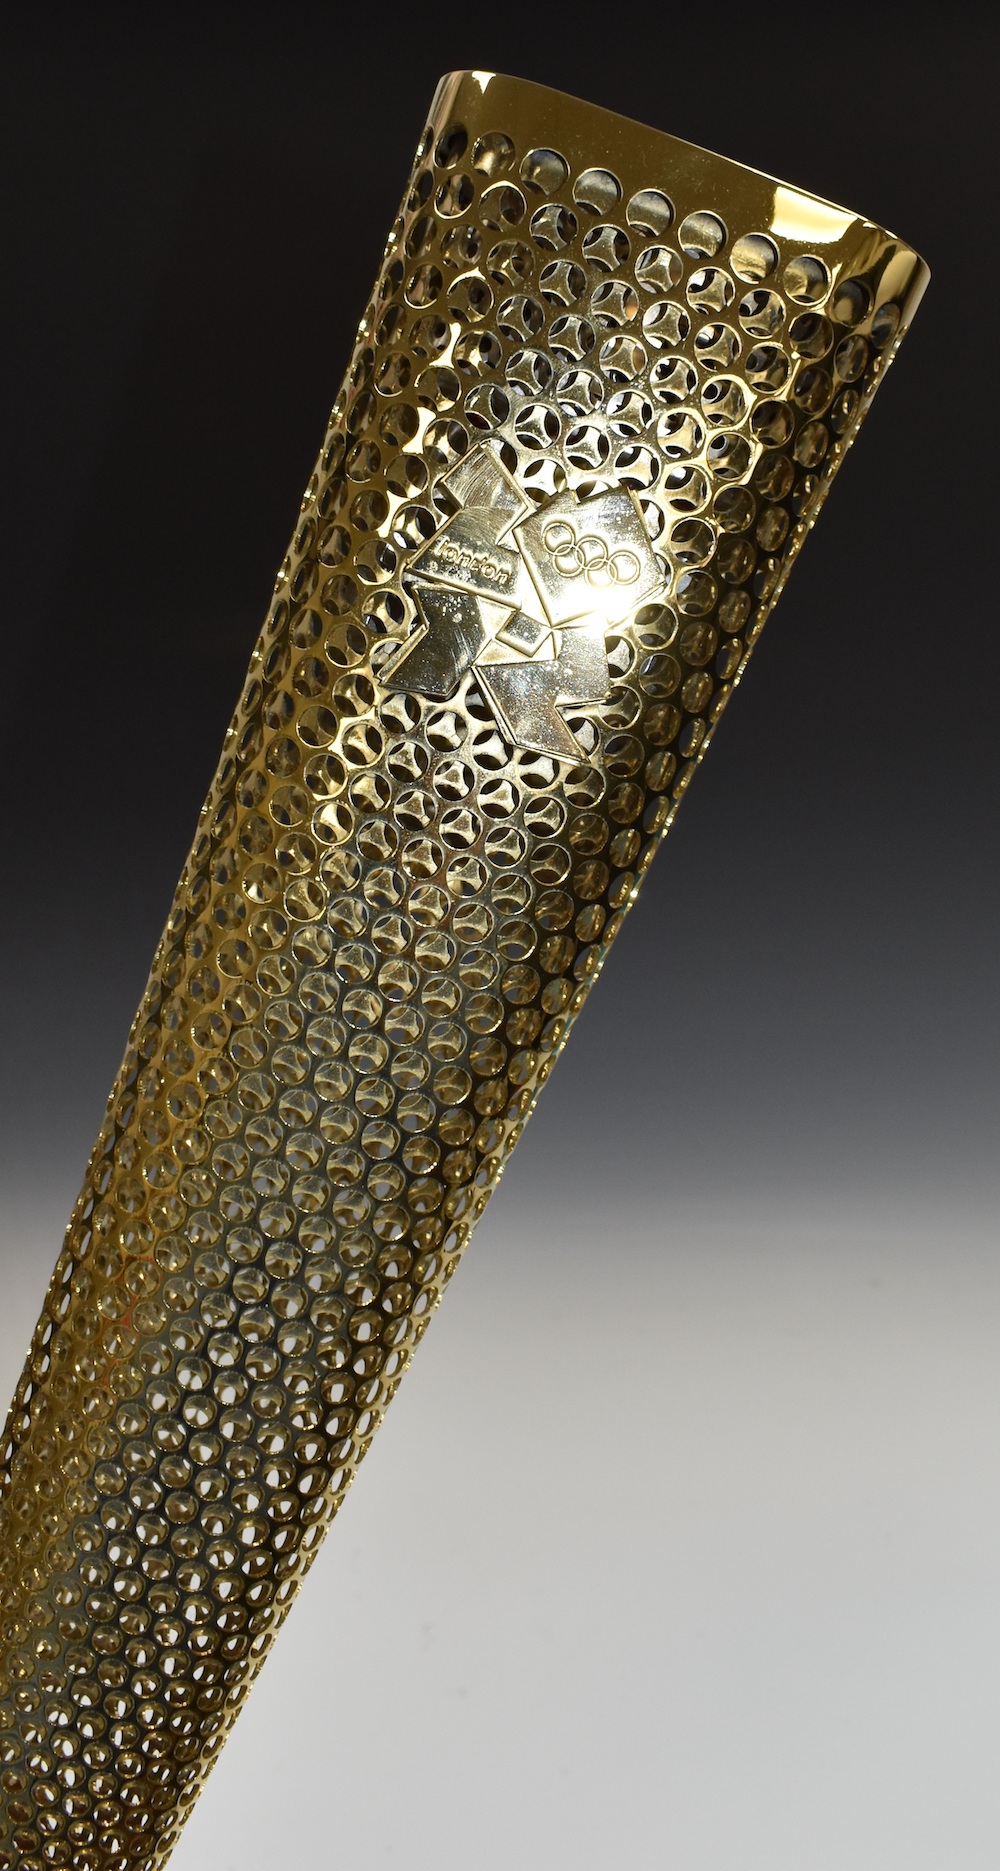 2012 London Olympics Relay Torch With Certificate Sold Ś1,950